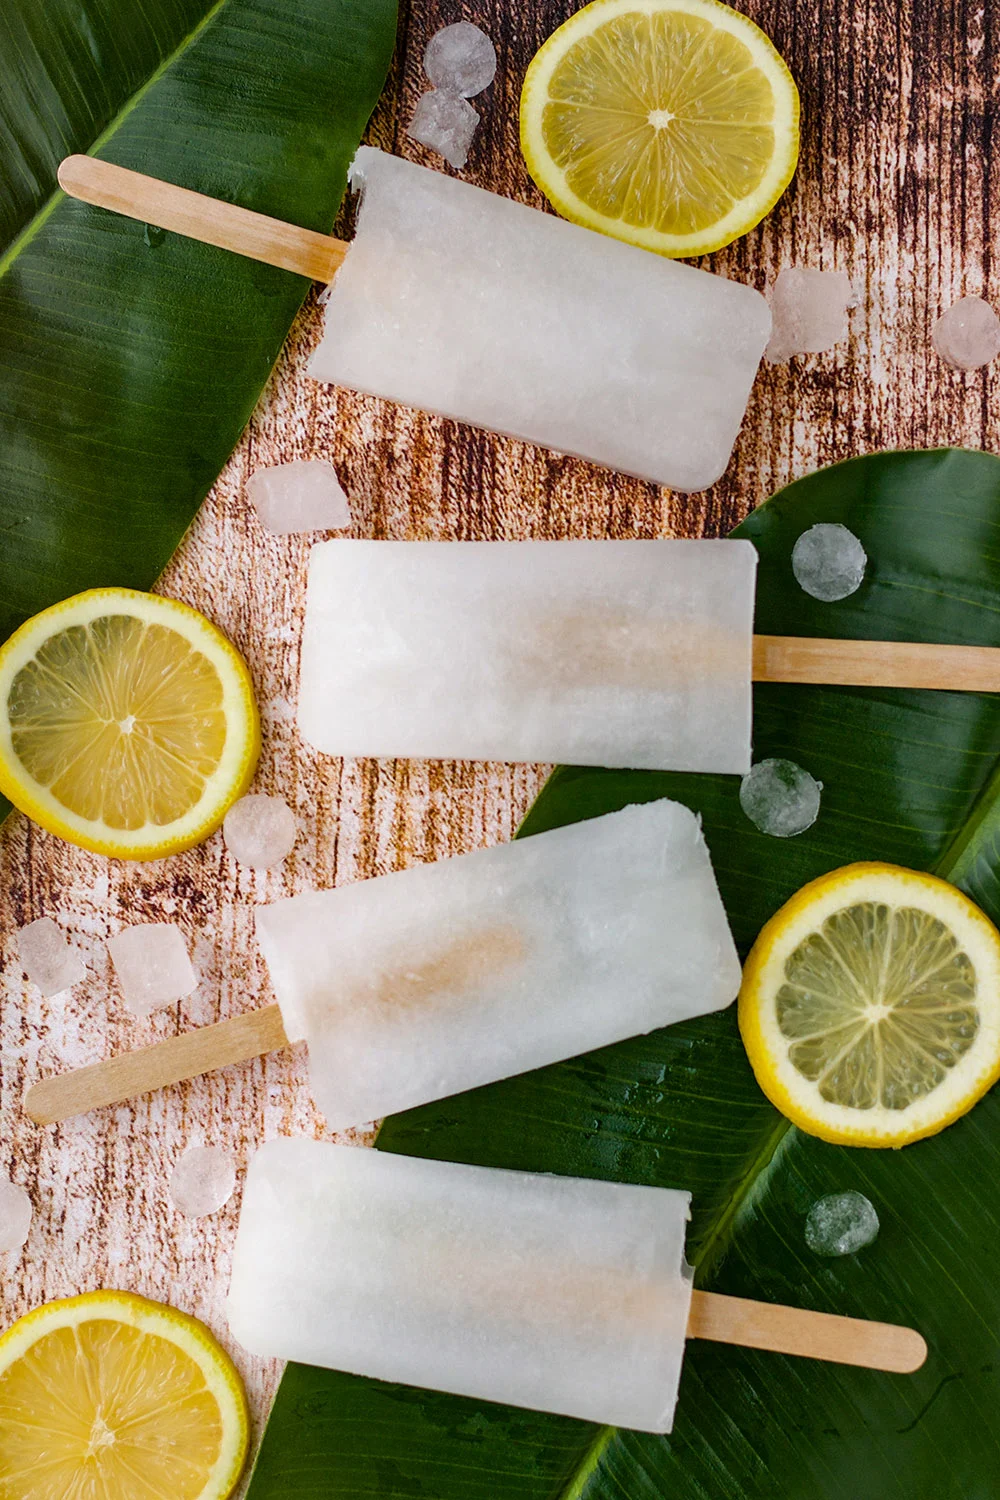 Four ice pops on a table with ice cubes, leaves, and lemon slices.